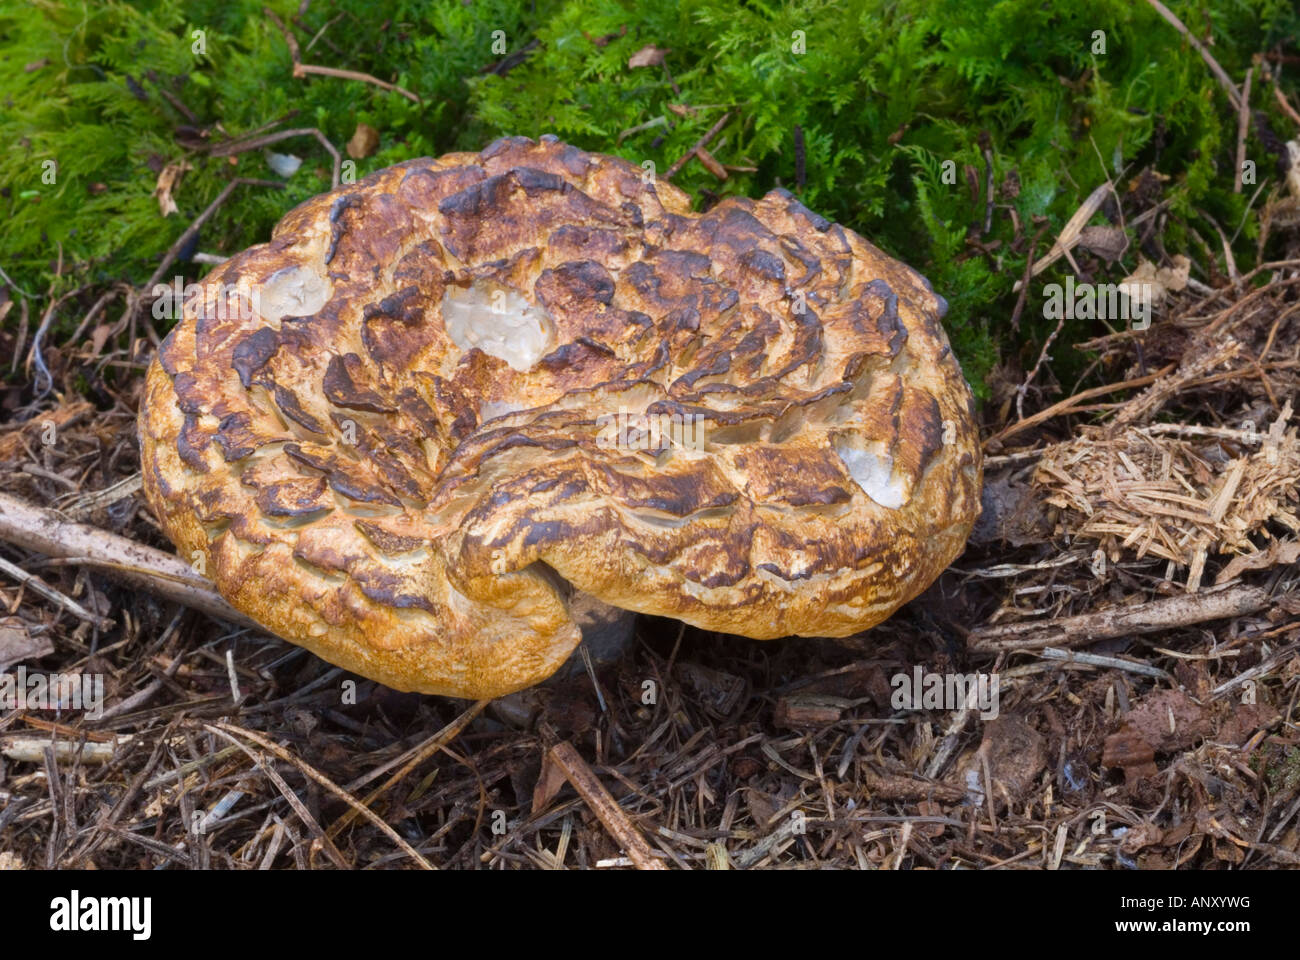 Sarcodon imbricatus rare and vulnerable Hedgehog mushroom growing - portrait: edible fungus with large brownish cap fruiting body with scales Stock Photo